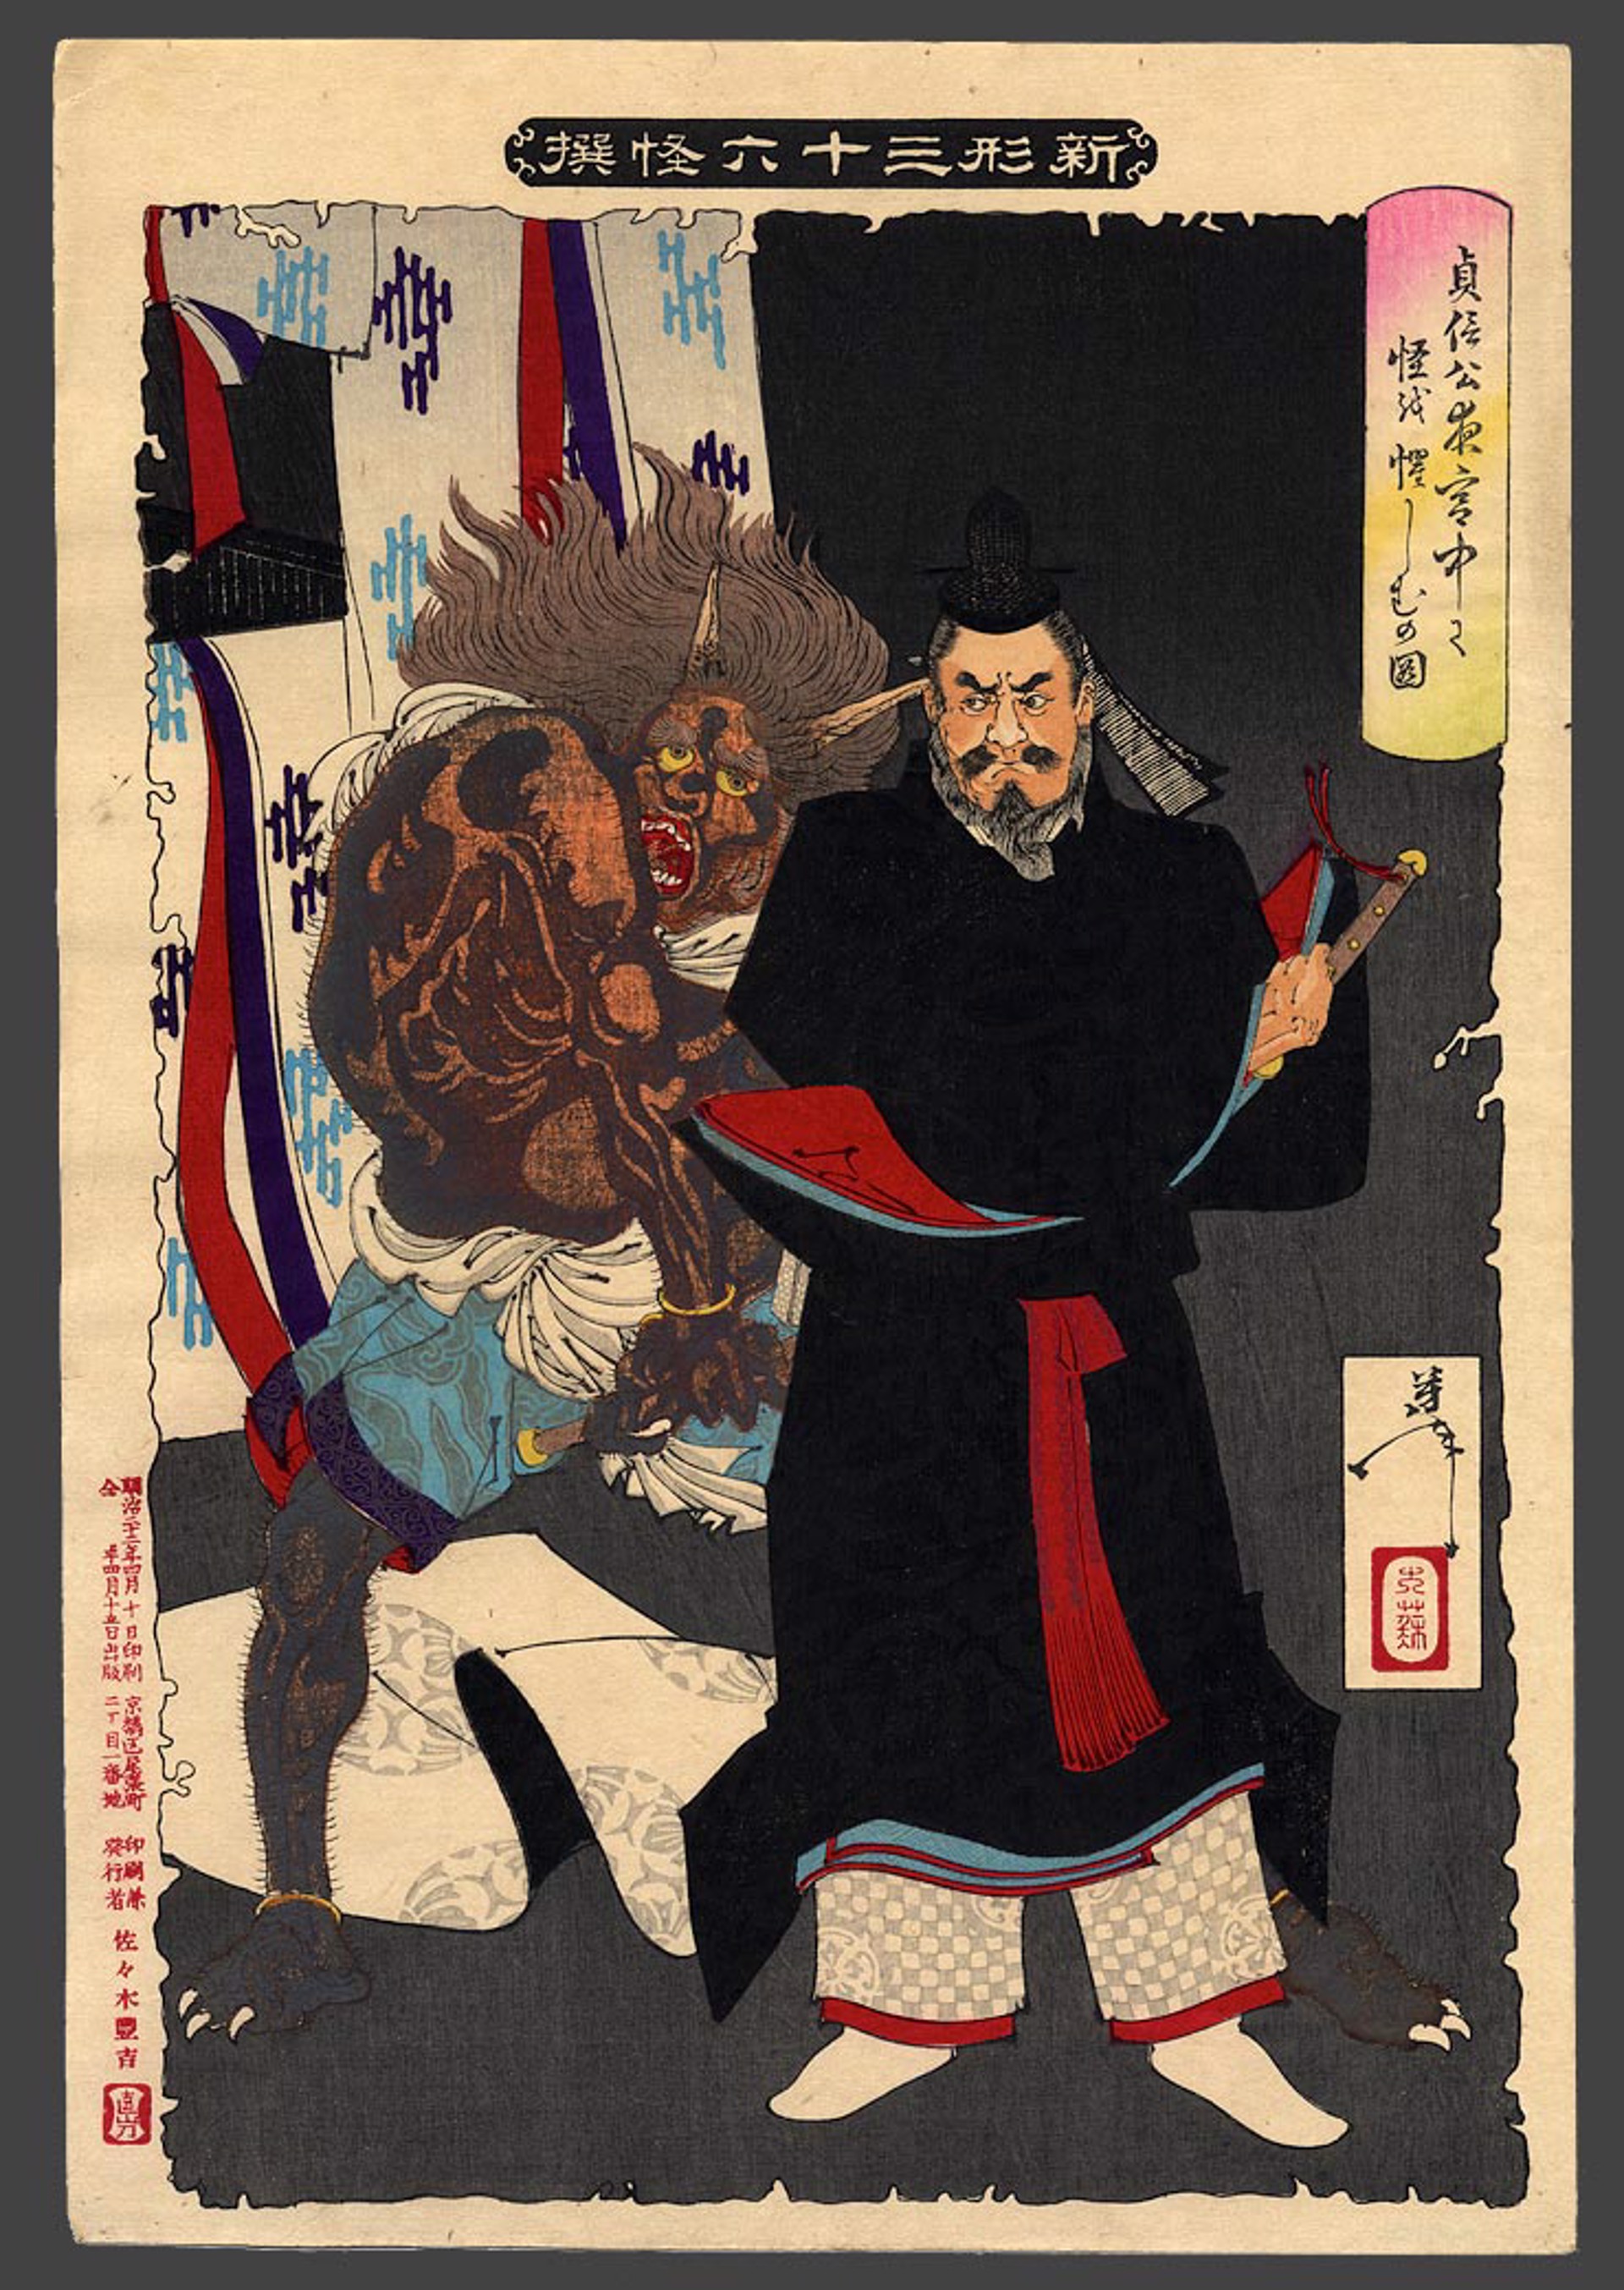 The Heian nobleman Sadanobu threatening a demon in the imperial palace, Kyoto 36 Ghosts by Yoshitoshi